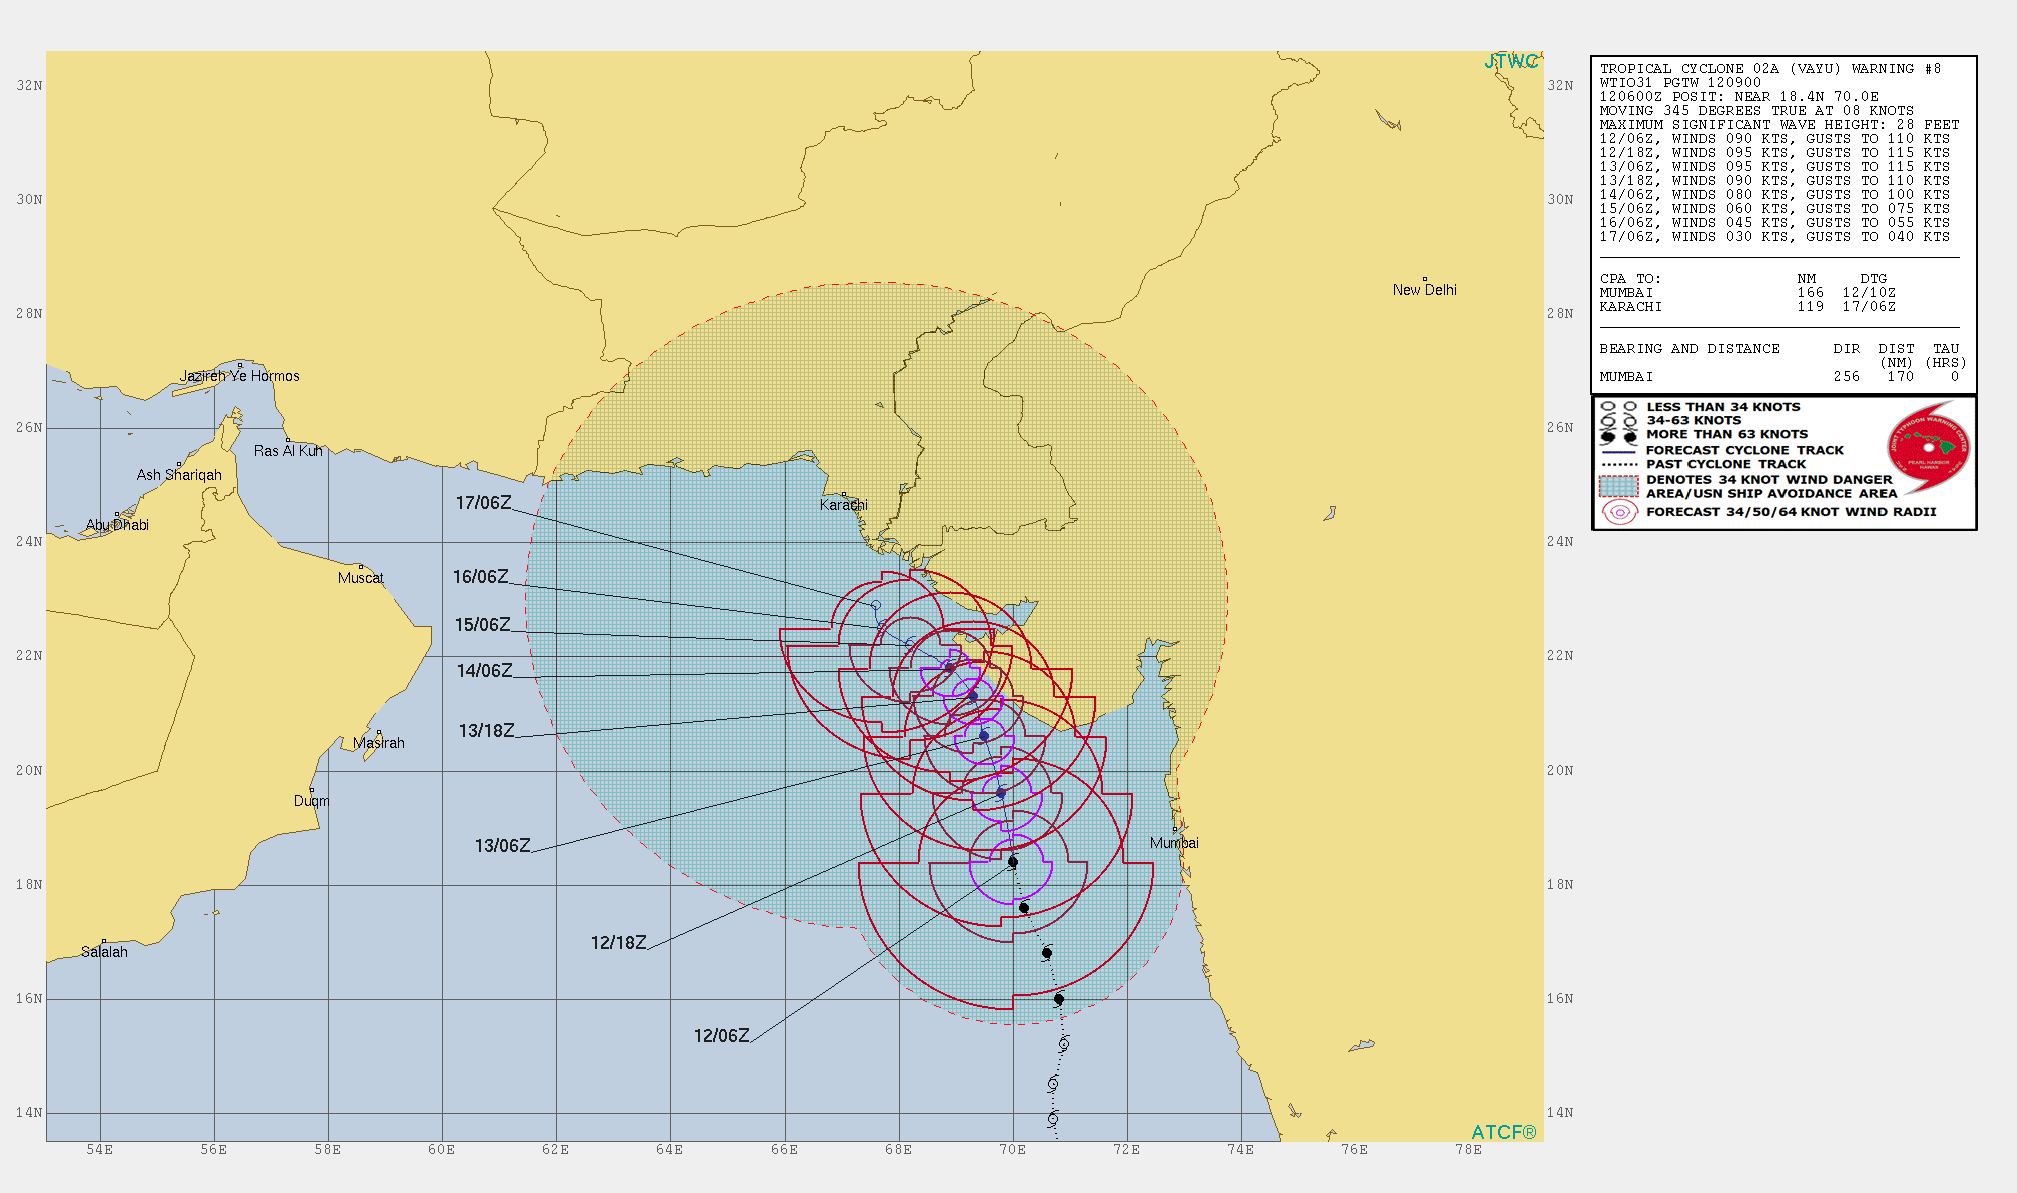 INTENSITY FORECAST TO PEAK WITHIN 24H